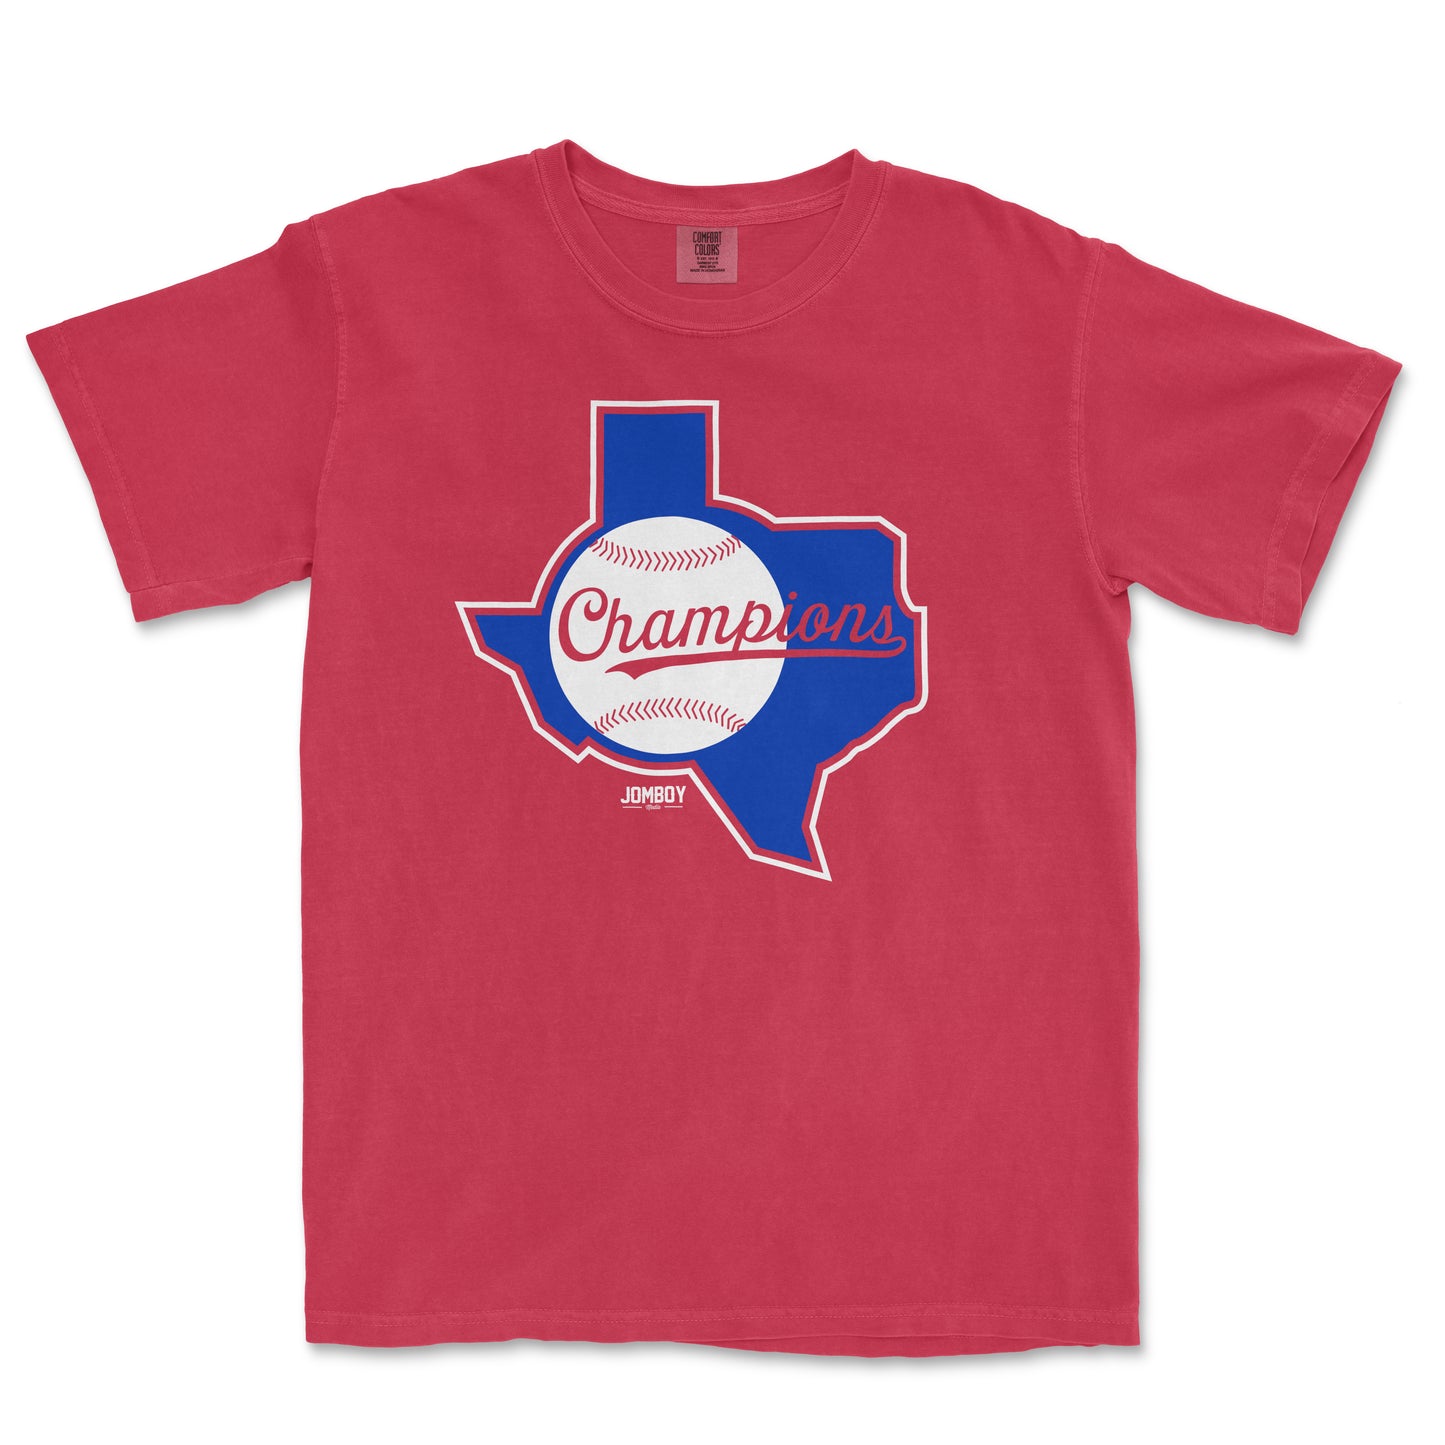 The Champs in Texas | Comfort Colors® Vintage Tee